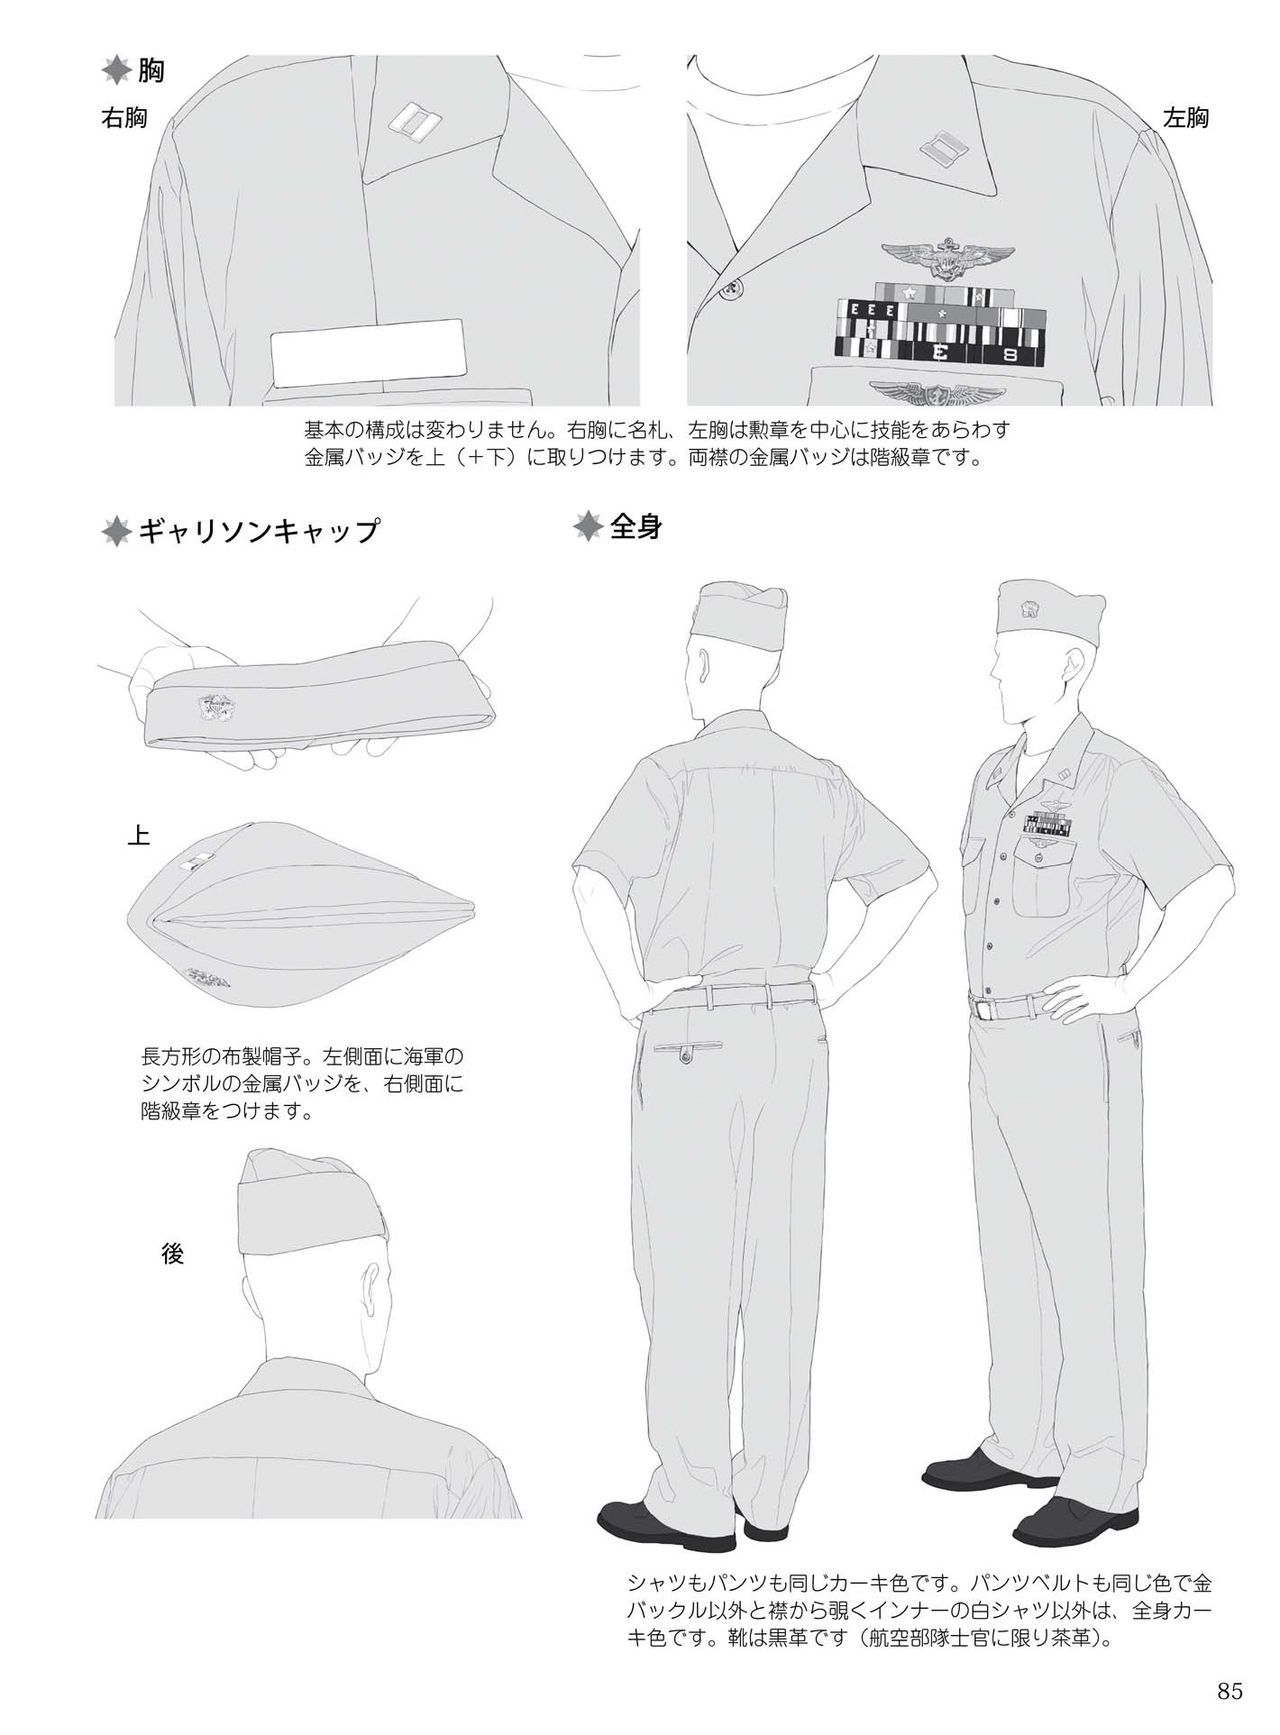 How to draw military uniforms and uniforms From Self-Defense Forces 軍服・制服の描き方 アメリカ軍・自衛隊の制服から戦闘服まで 88